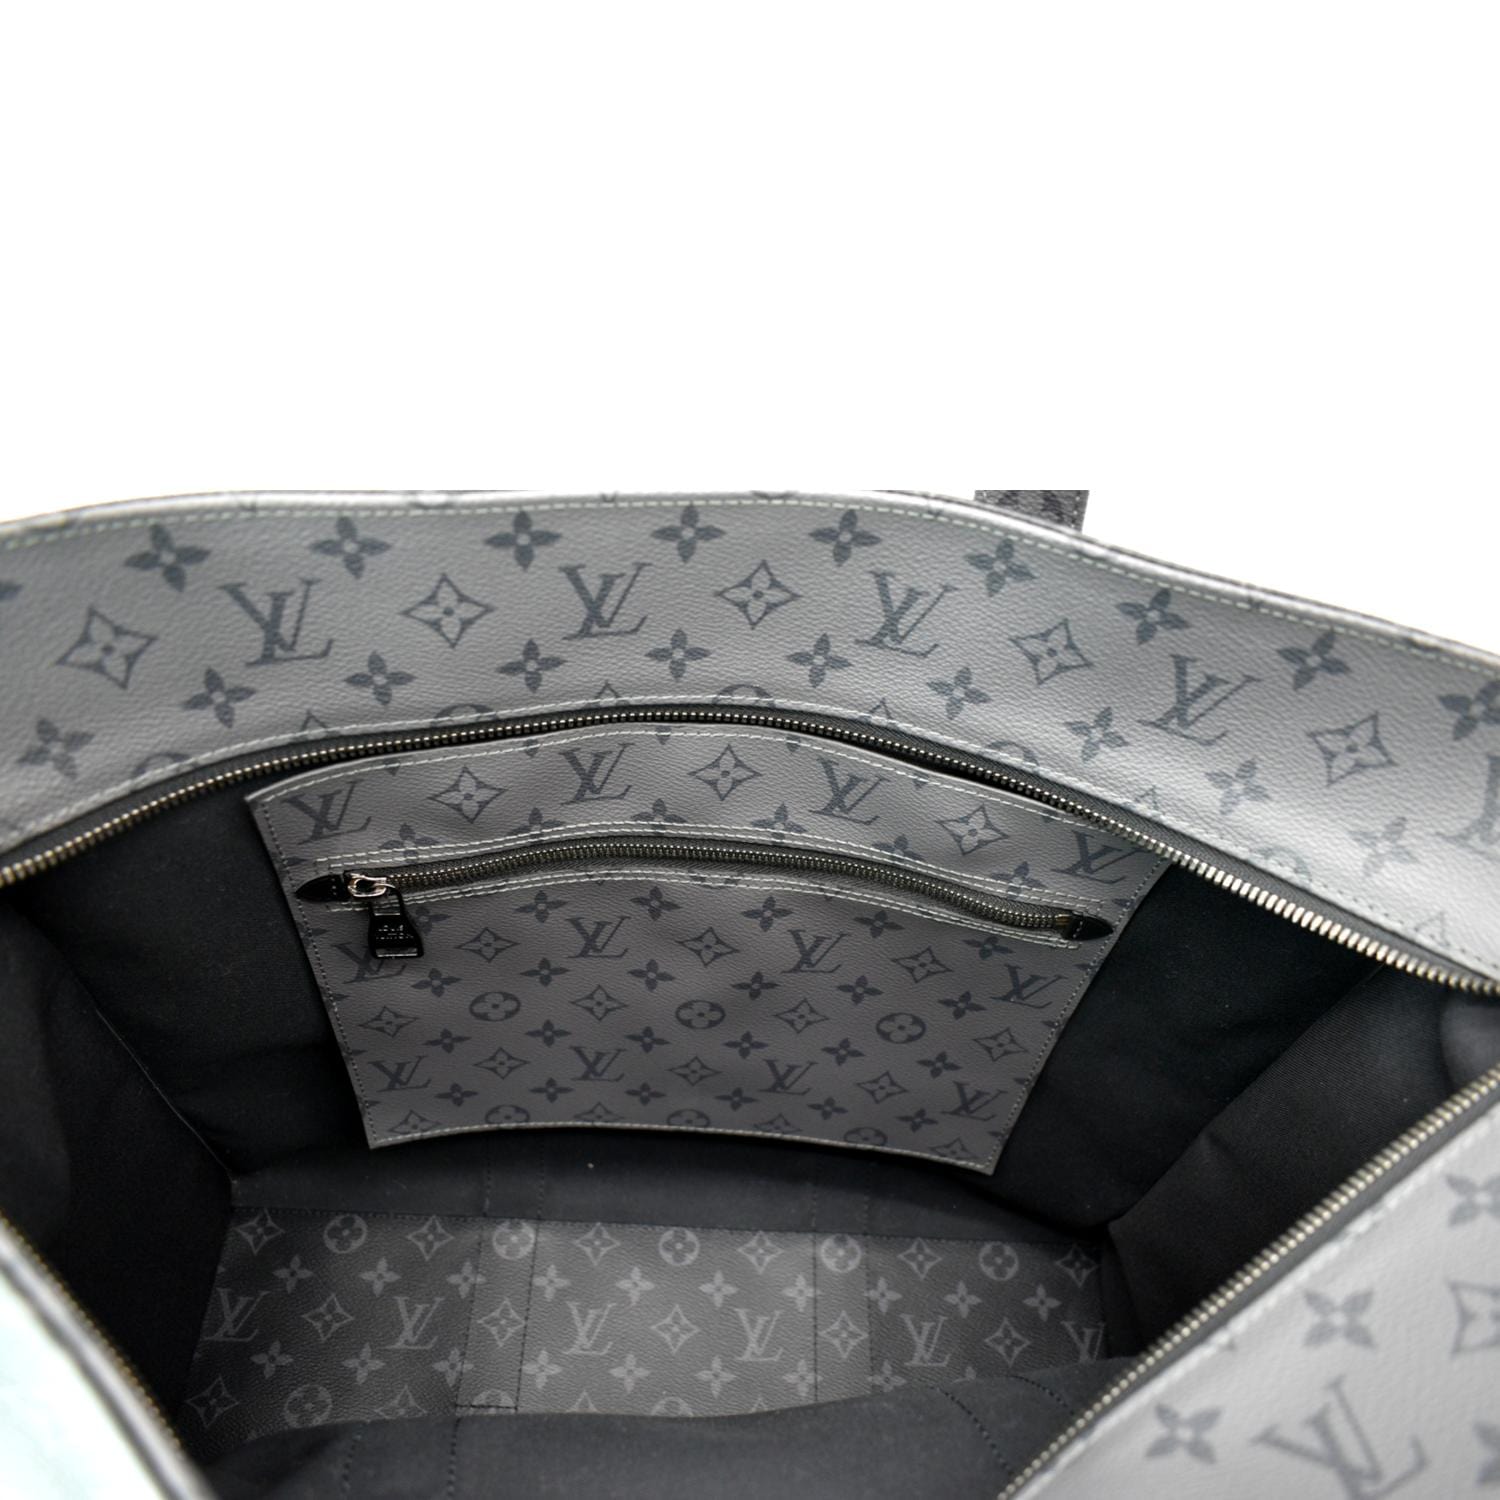 Louis Vuitton Tote Black Bags & Handbags for Women, Authenticity  Guaranteed